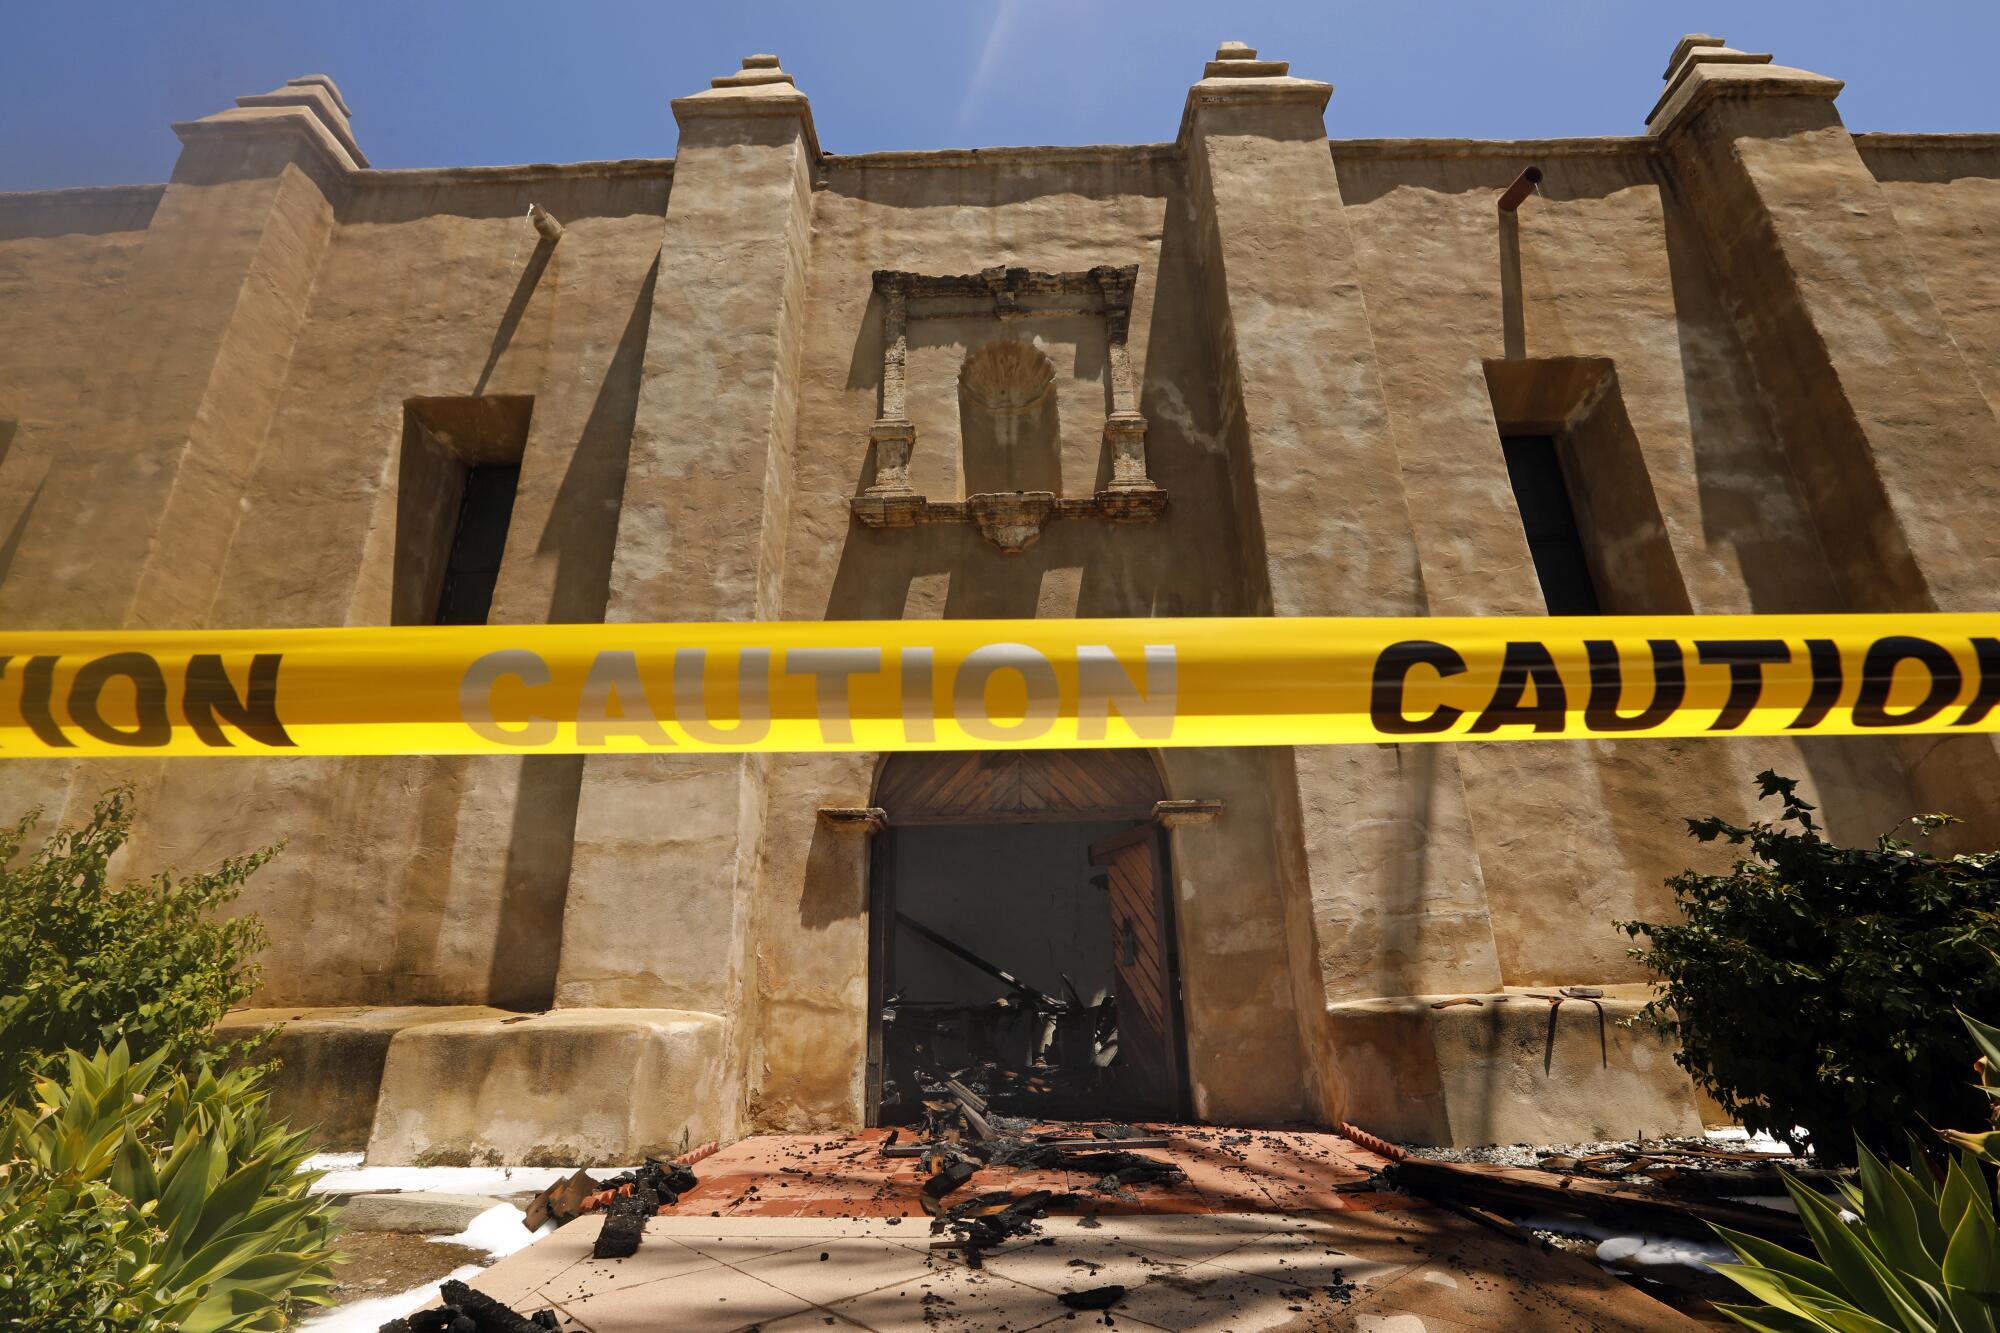 Caution tape in front of a door of the San Gabriel Mission, with burned debris scattered in front of the door